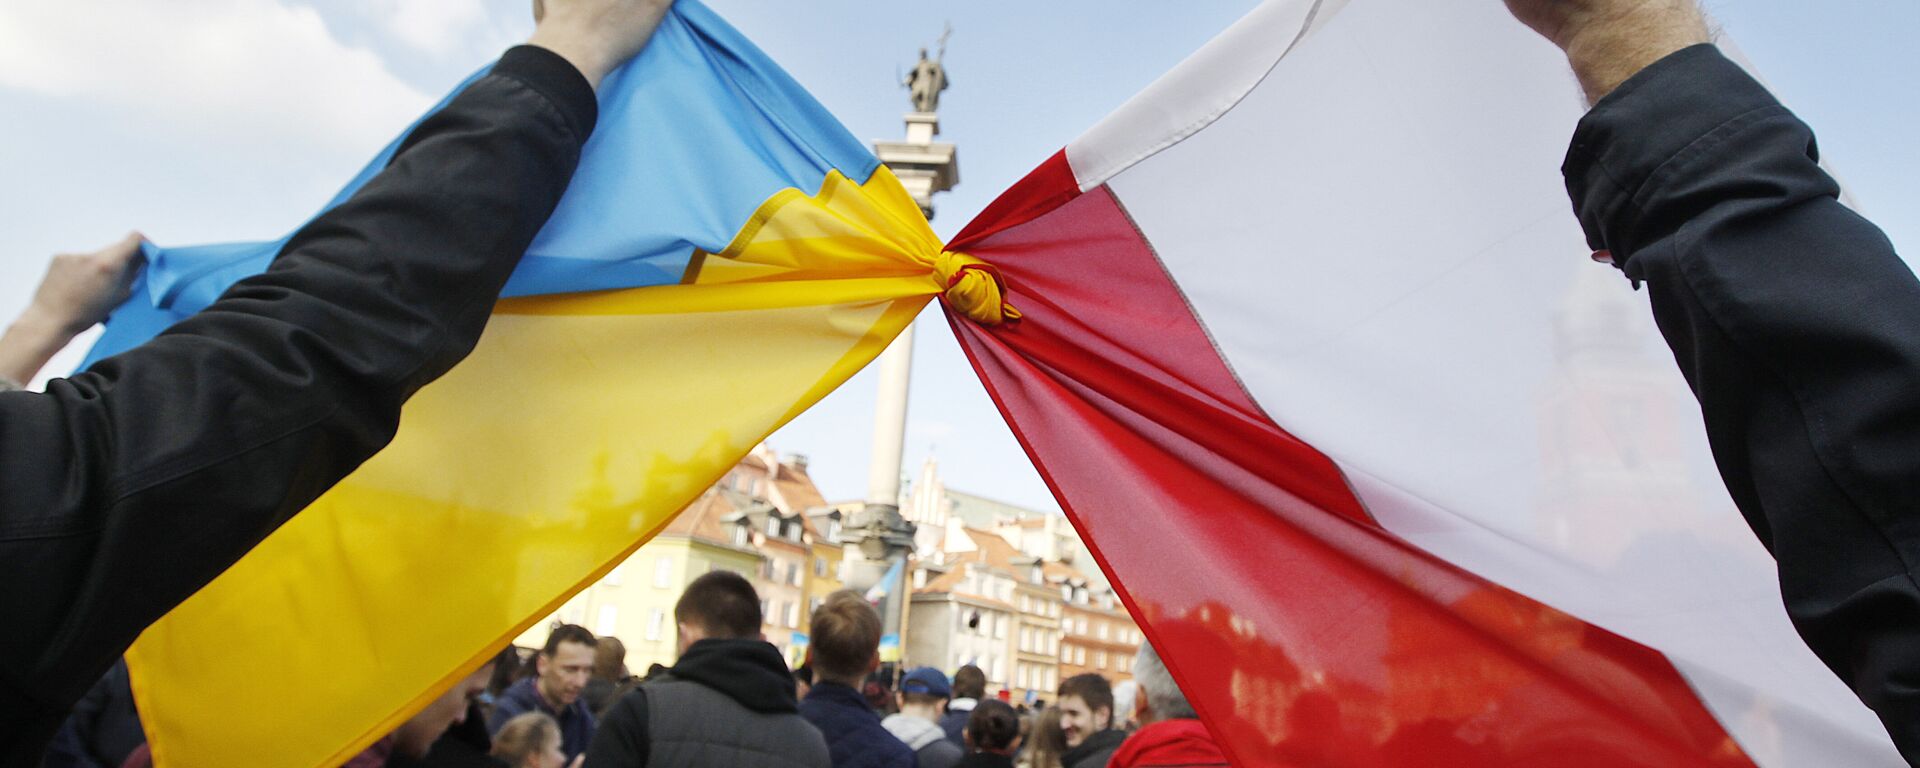 People hold tied Polish, right, and Ukrainian flags during a demonstration supporting the opposition movement in Ukraine, in Warsaw, Poland, Sunday, Feb. 23, 2014 - Sputnik International, 1920, 28.05.2022